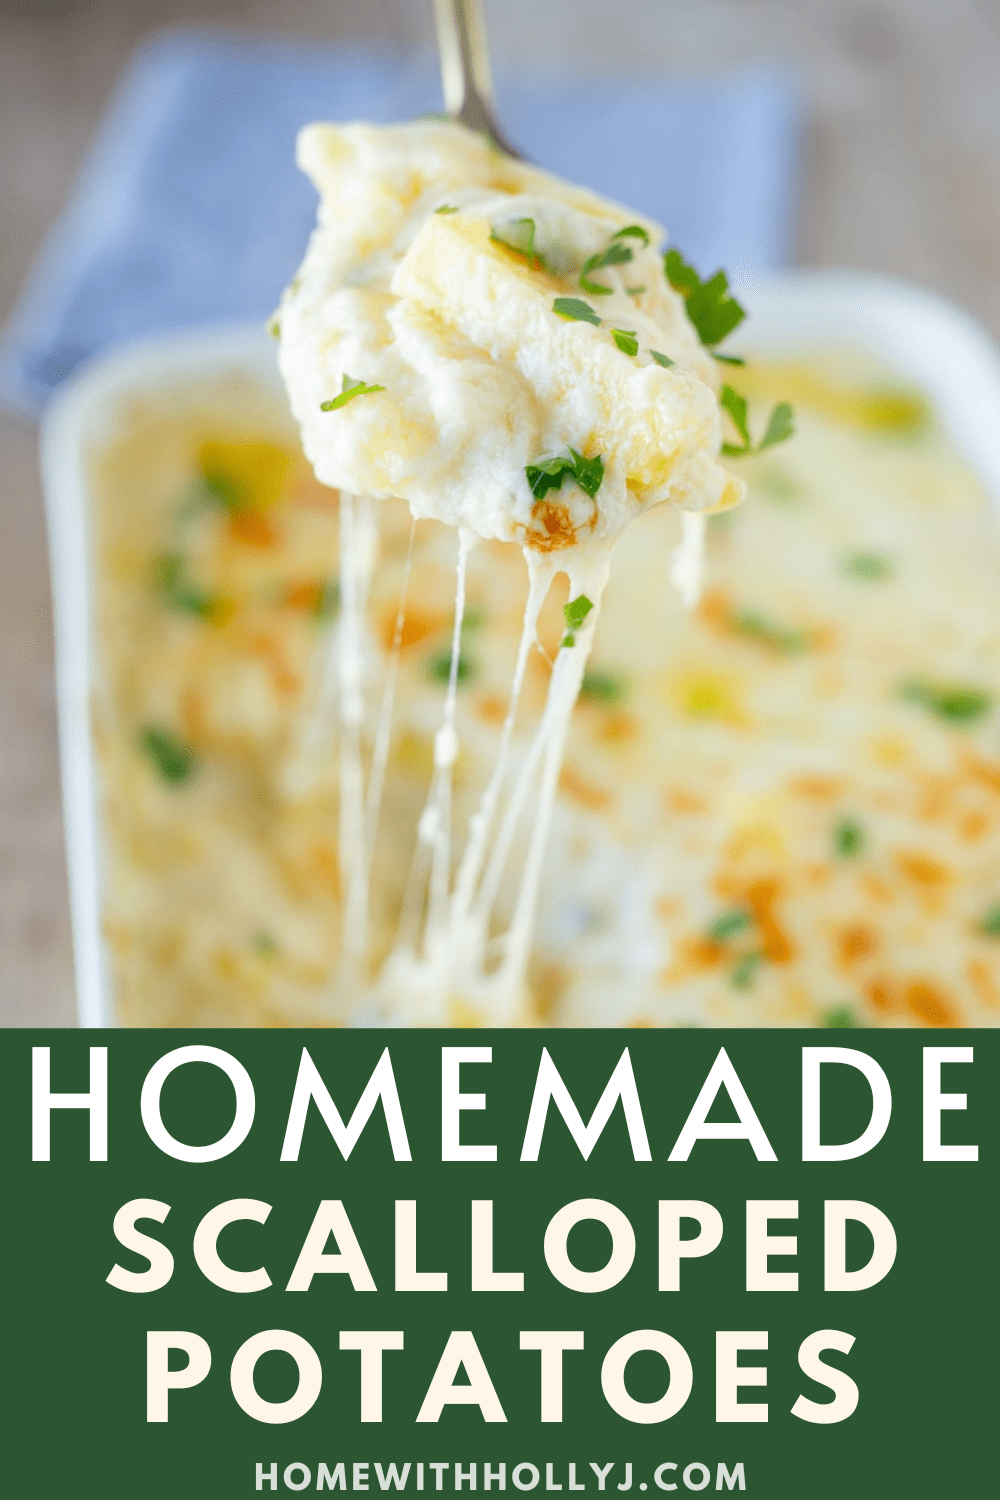 Sharing these simple homemade Scalloped Potatoes with Fontina Cheese. Comfort food at it's finest. Try this delicious recipe.